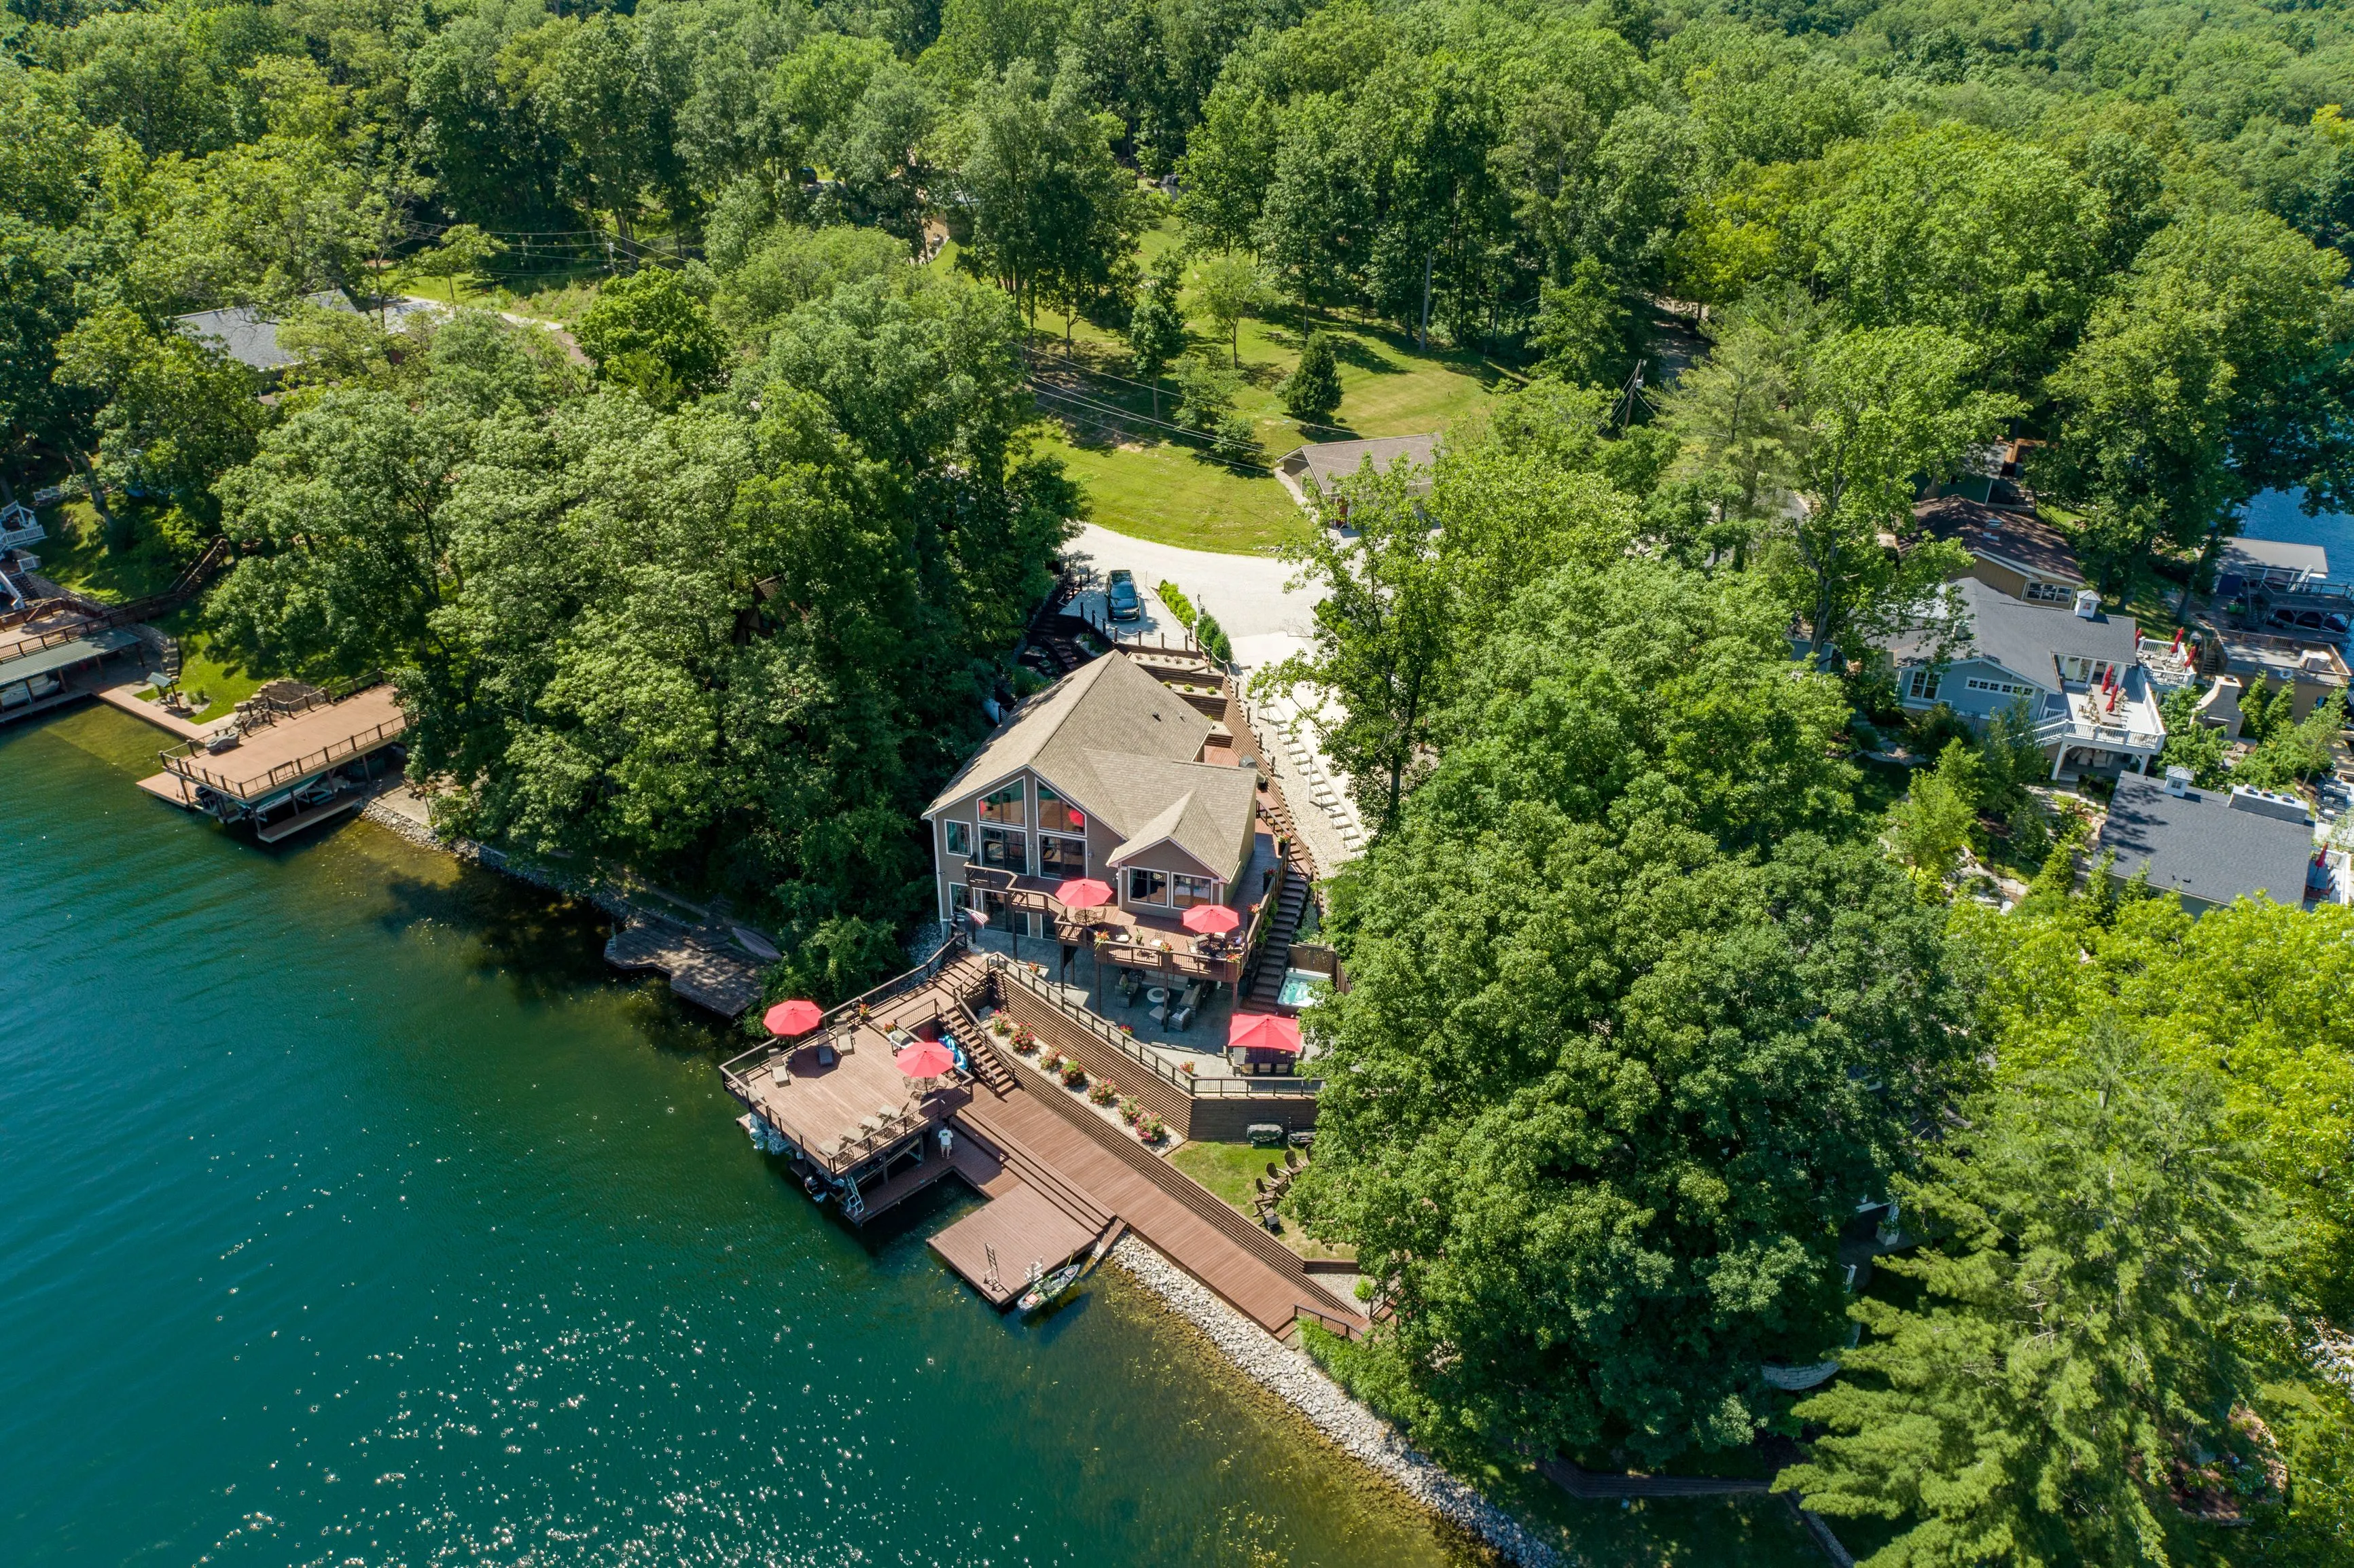 Aerial view of a lakeside house surrounded by lush greenery with a dock and boats.